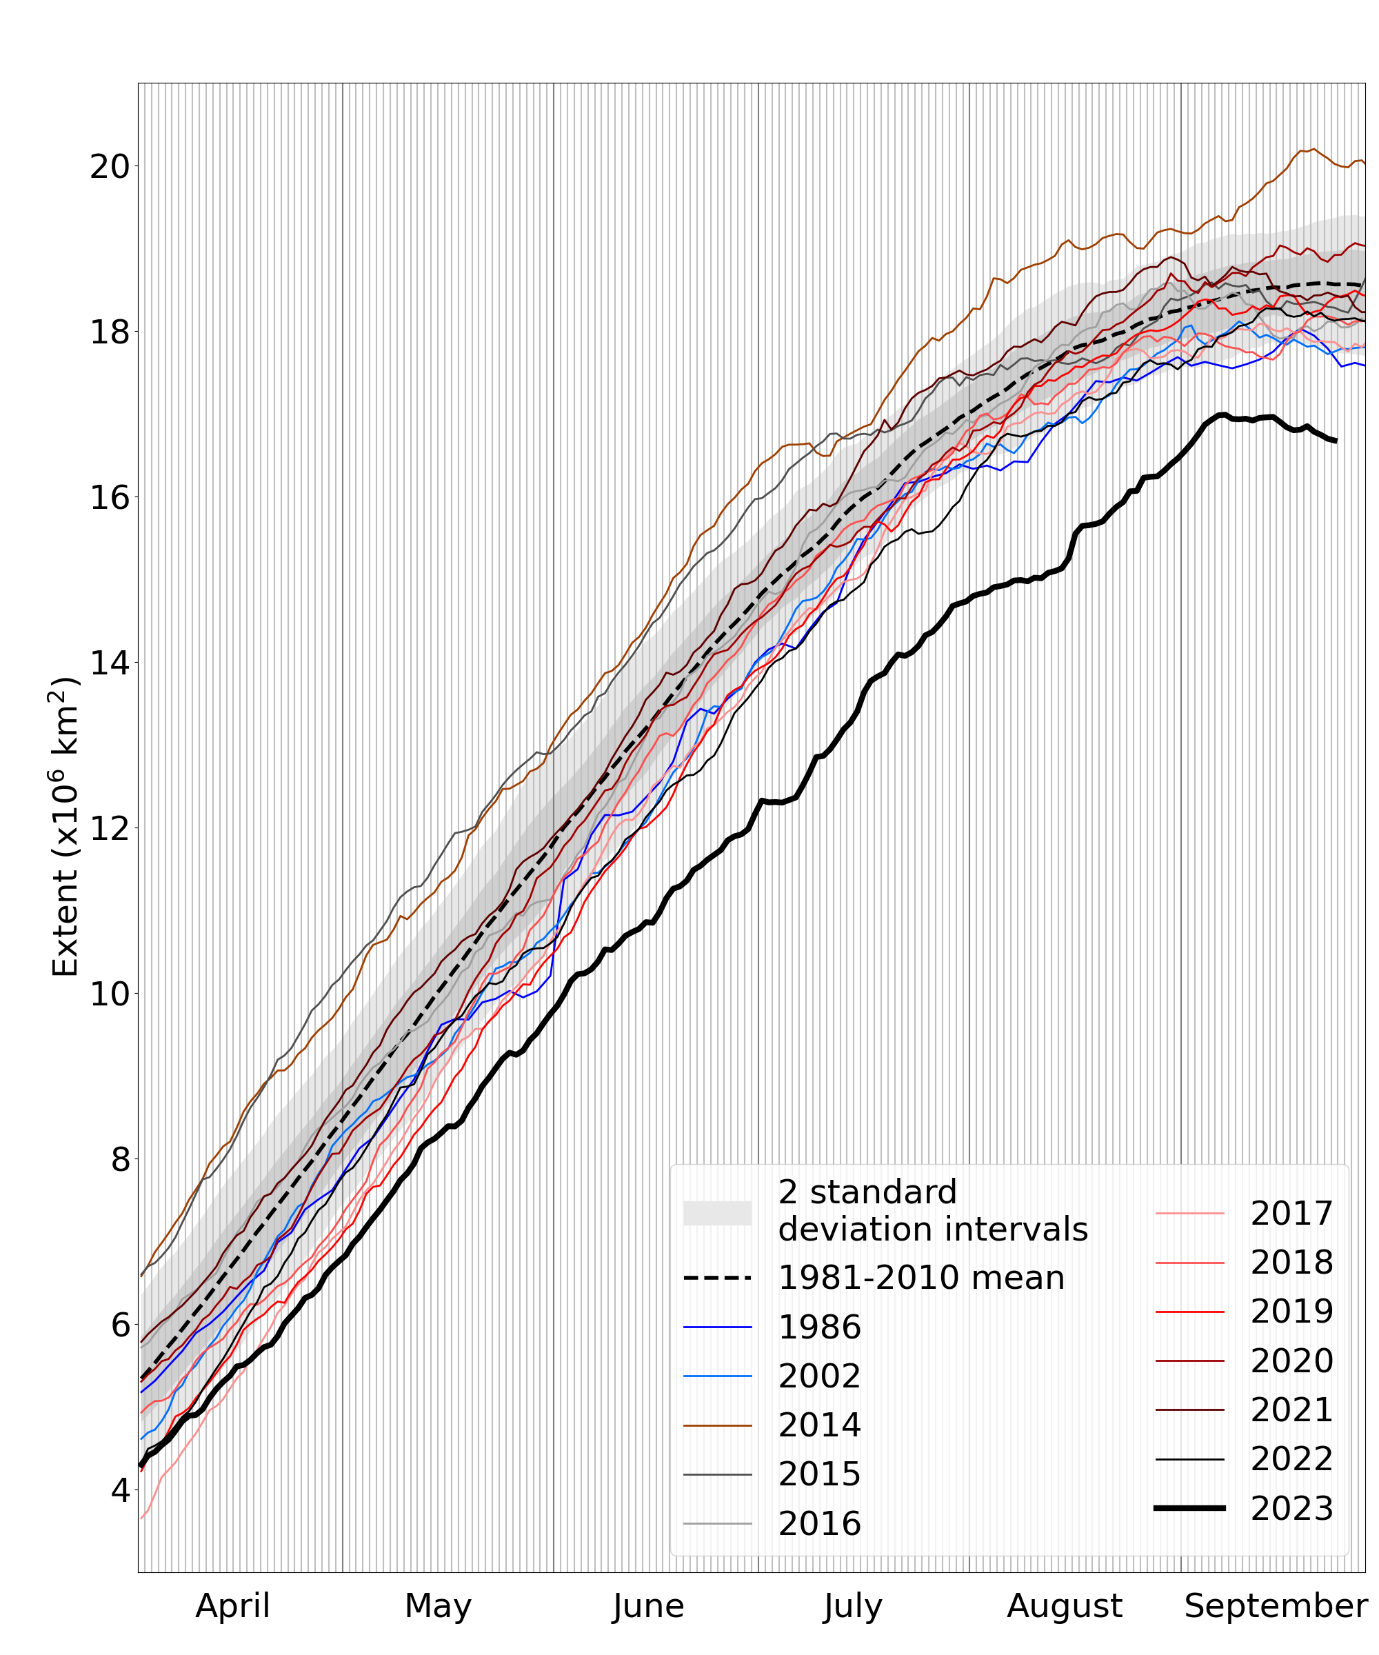 Daily Antarctic sea ice extent for 2023, compared with recent years, some historic low-ice years, and the 1981-2010 average, with +/- 1 and 2 standard deviation intervals indicated by the shaded areas. Data are from the National Snow and Ice Data Center (NSIDC).